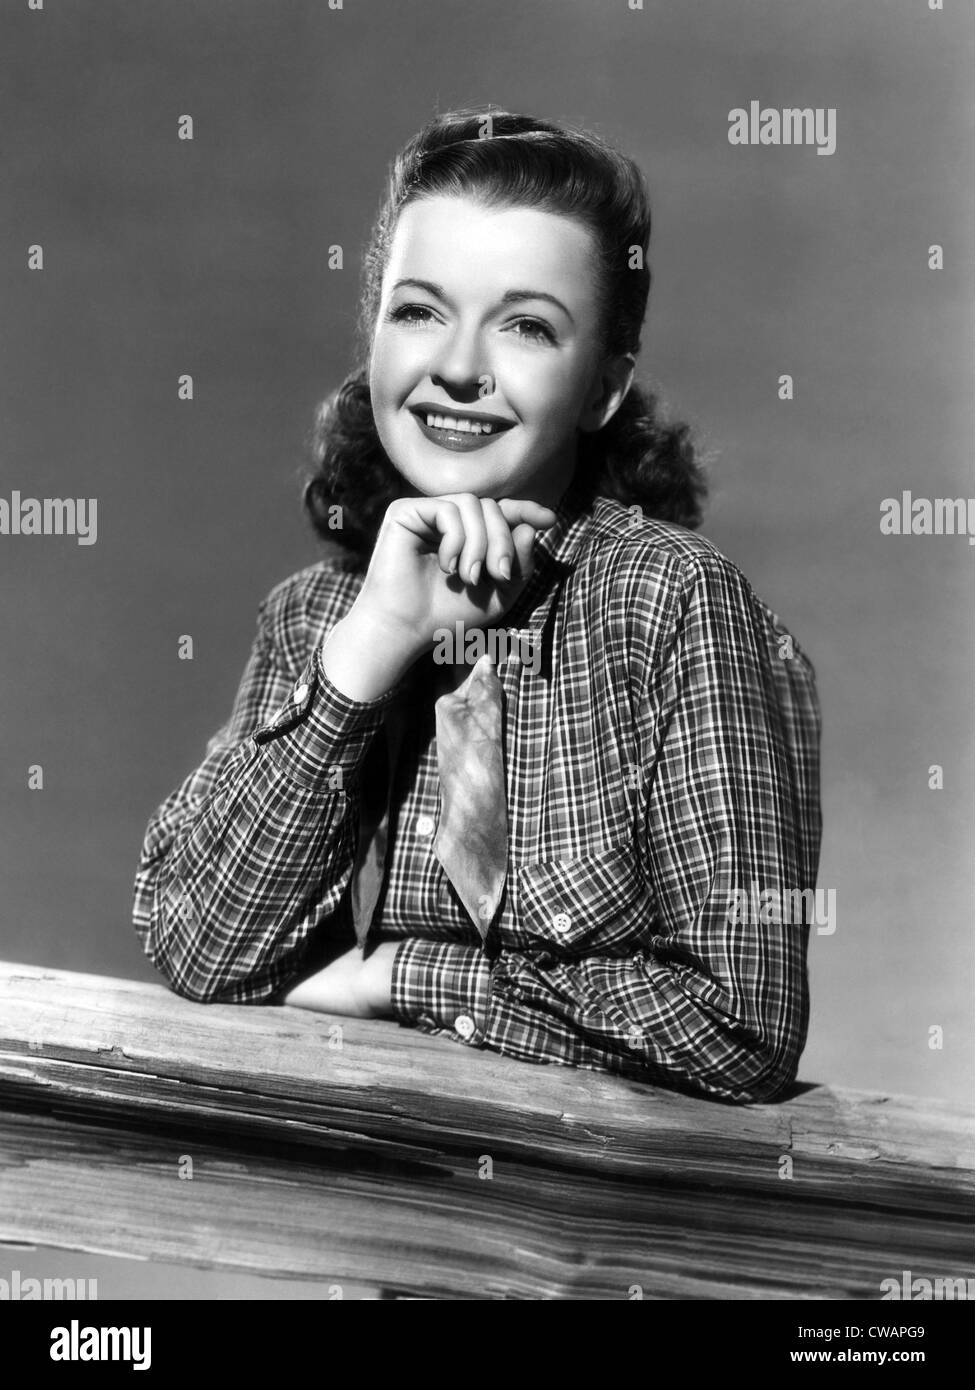 Dale Evans (1912-2001), American actress, singer and wife of Roy Rogers, circa 1950s. Courtesy: CSU Archives/Everett Collection Stock Photo